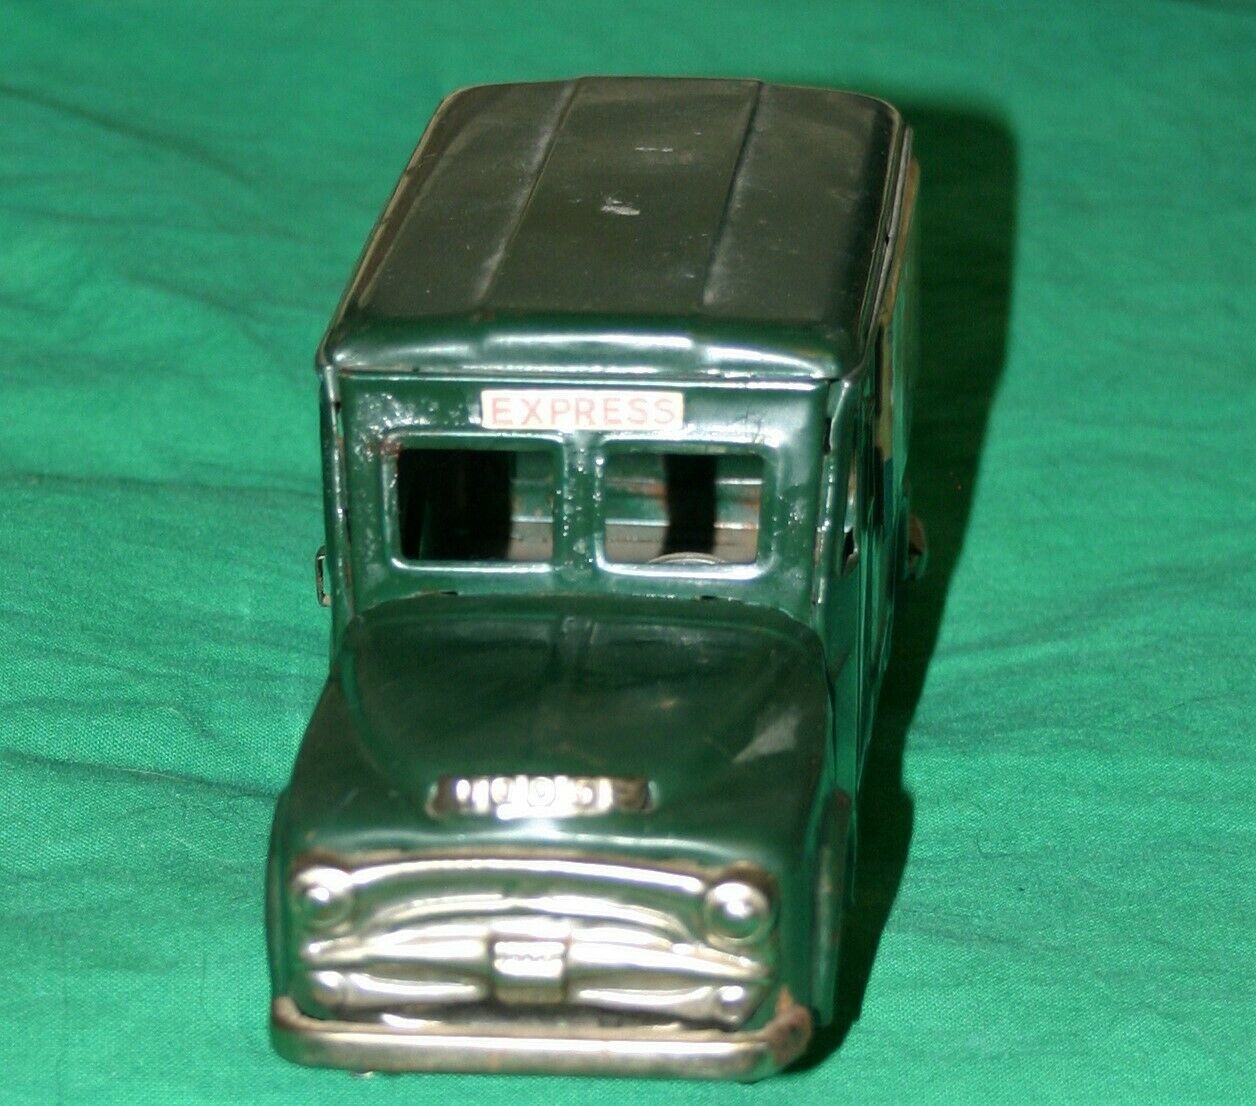 VTG SSS TIN LITHO FRICTION TOY TRUCK DODGE CARGO NATIONWIDE RR RAIL AIR EXPRESS - $40.40